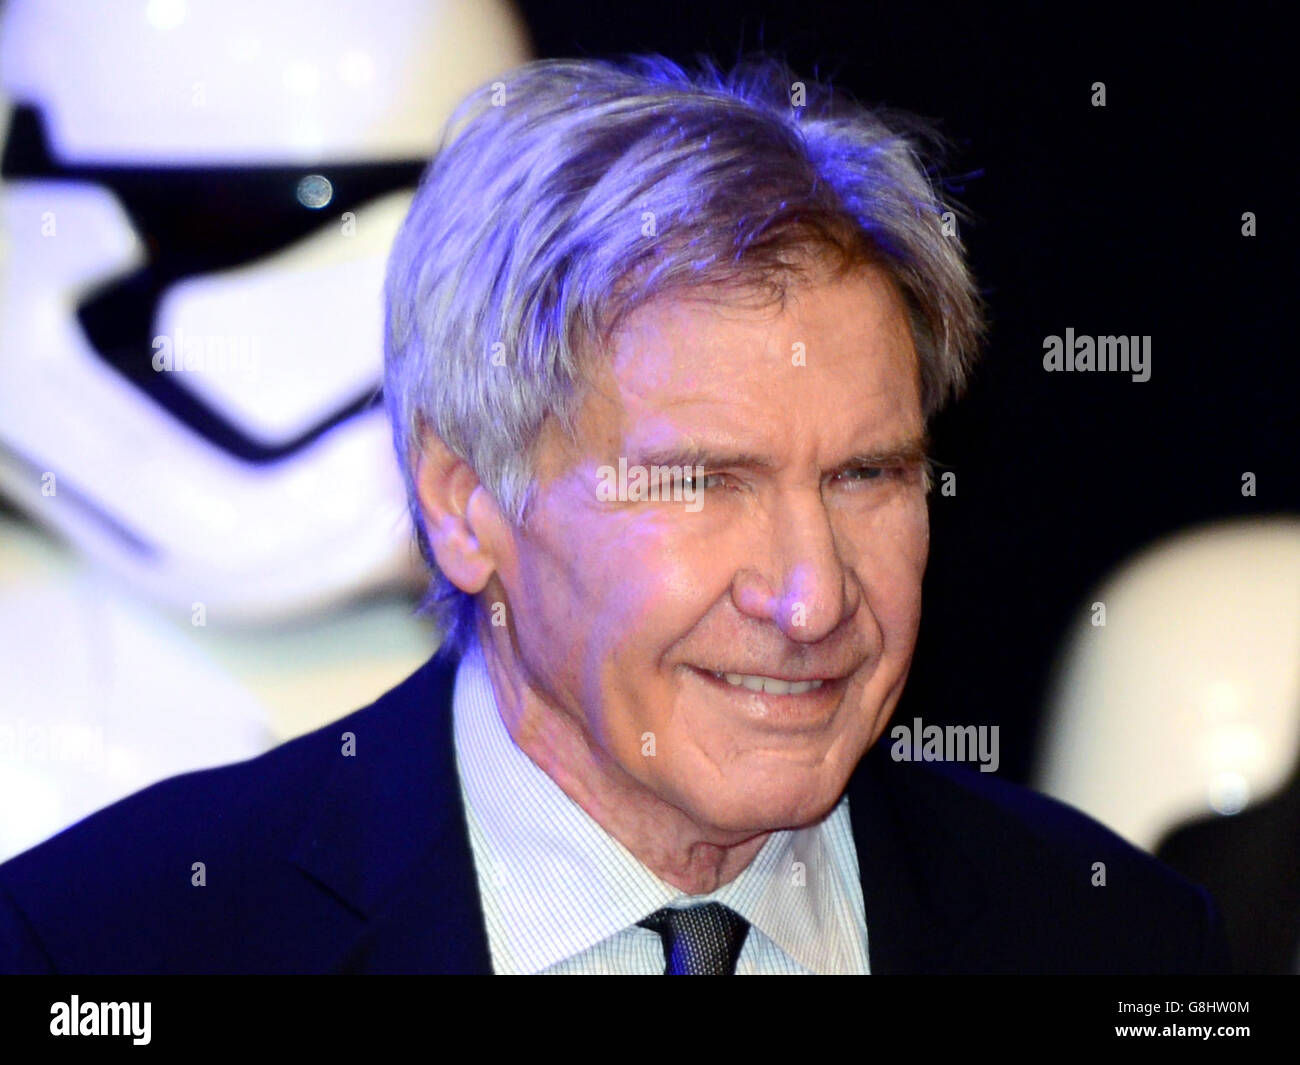 Star Wars: The Force Awakens European Premiere - London. Harrison Ford attending the Star Wars: The Force Awakens European Premiere held in Leicester Square, London. Stock Photo